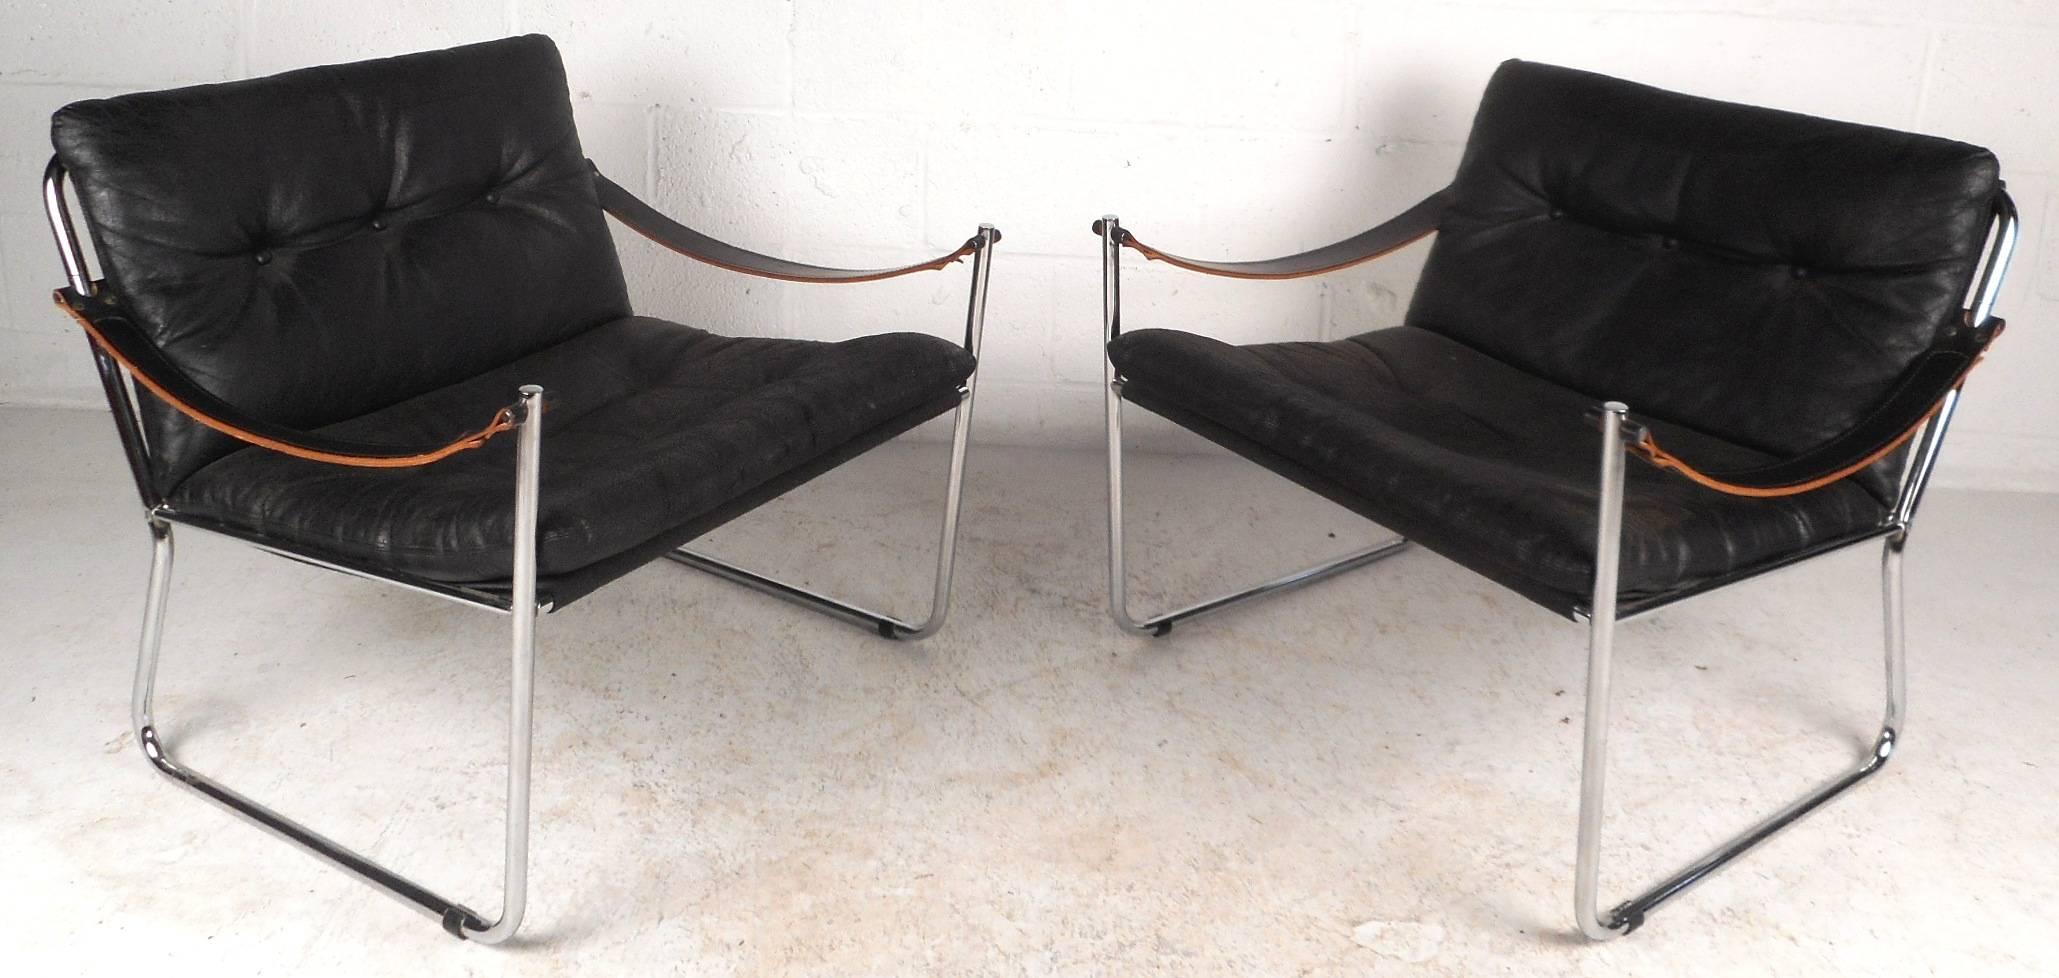 This beautiful pair of vintage modern wide lounge chairs feature thick leather straps that function as arm rests and a thick tubular chrome-plated frame. Sleek design with a thick padded cushion covered in tufted vinyl upholstery. The Angled sled